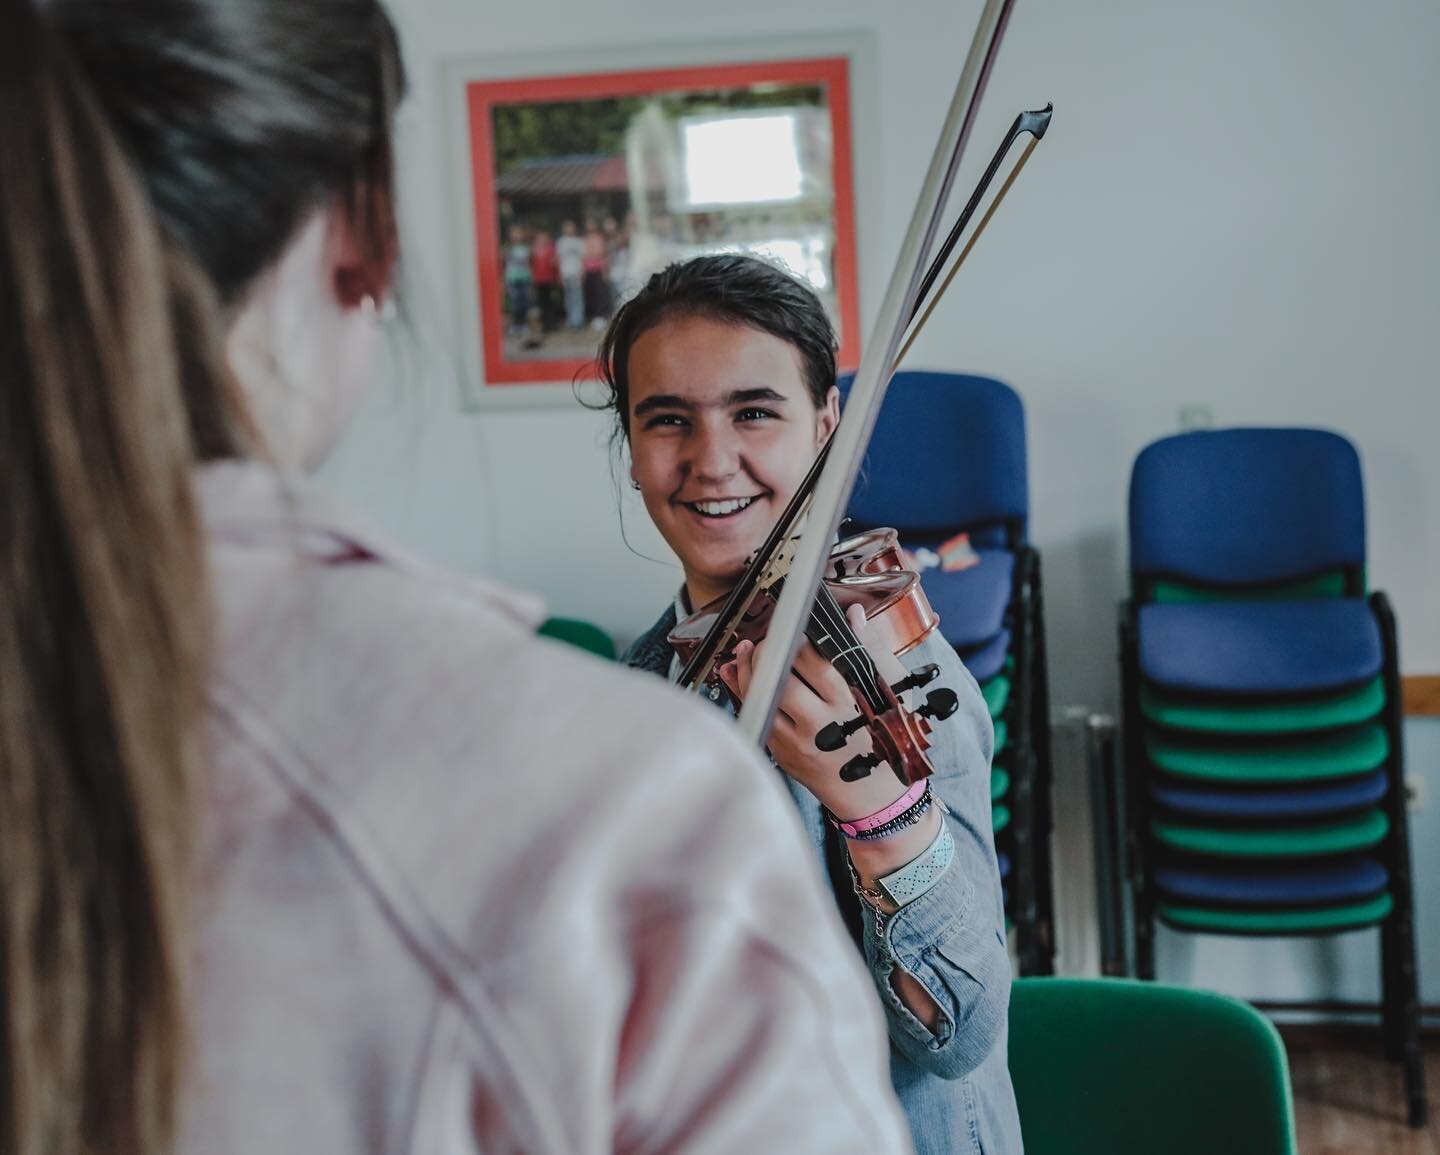 Music help us put smiles on your faces!
-
-
Teaching Artists International is a music fellowship organization that gives musicians the opportunity to serve and travel while teaching music abroad. For more information about how you can get involved wi